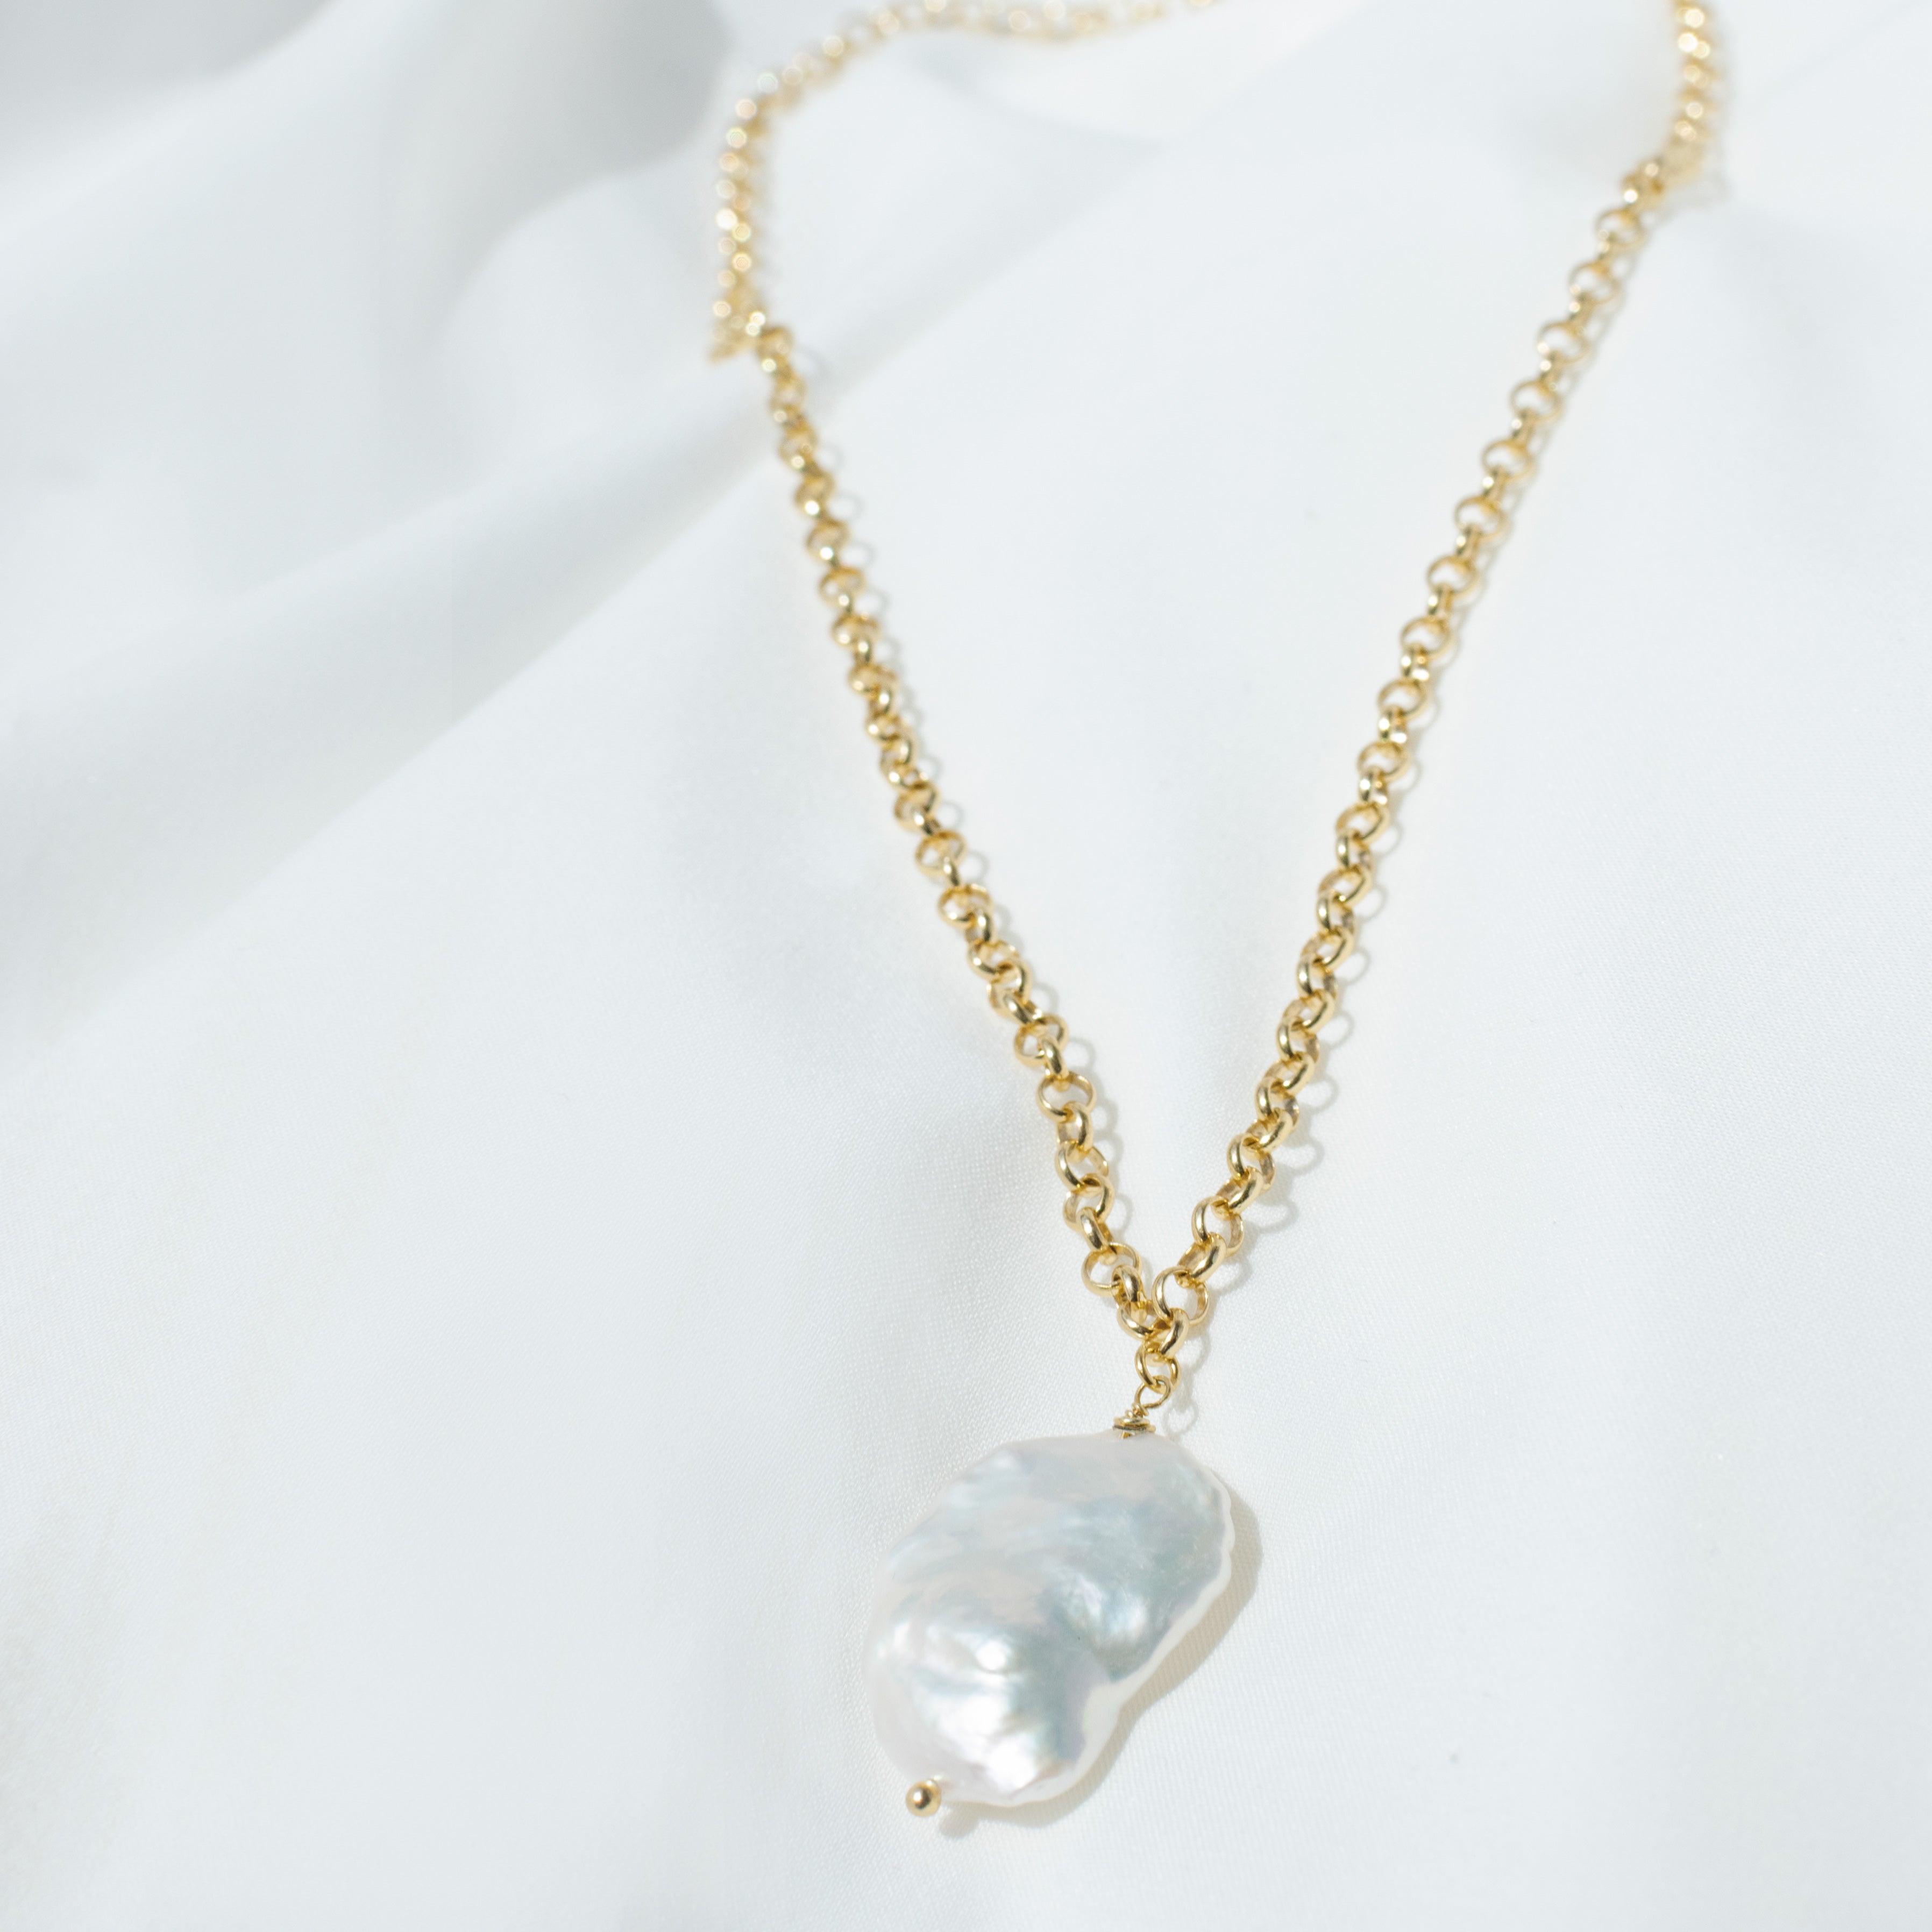 Baroque Pearl Necklace from One Dame Lane Bridal Jewellery Dublin